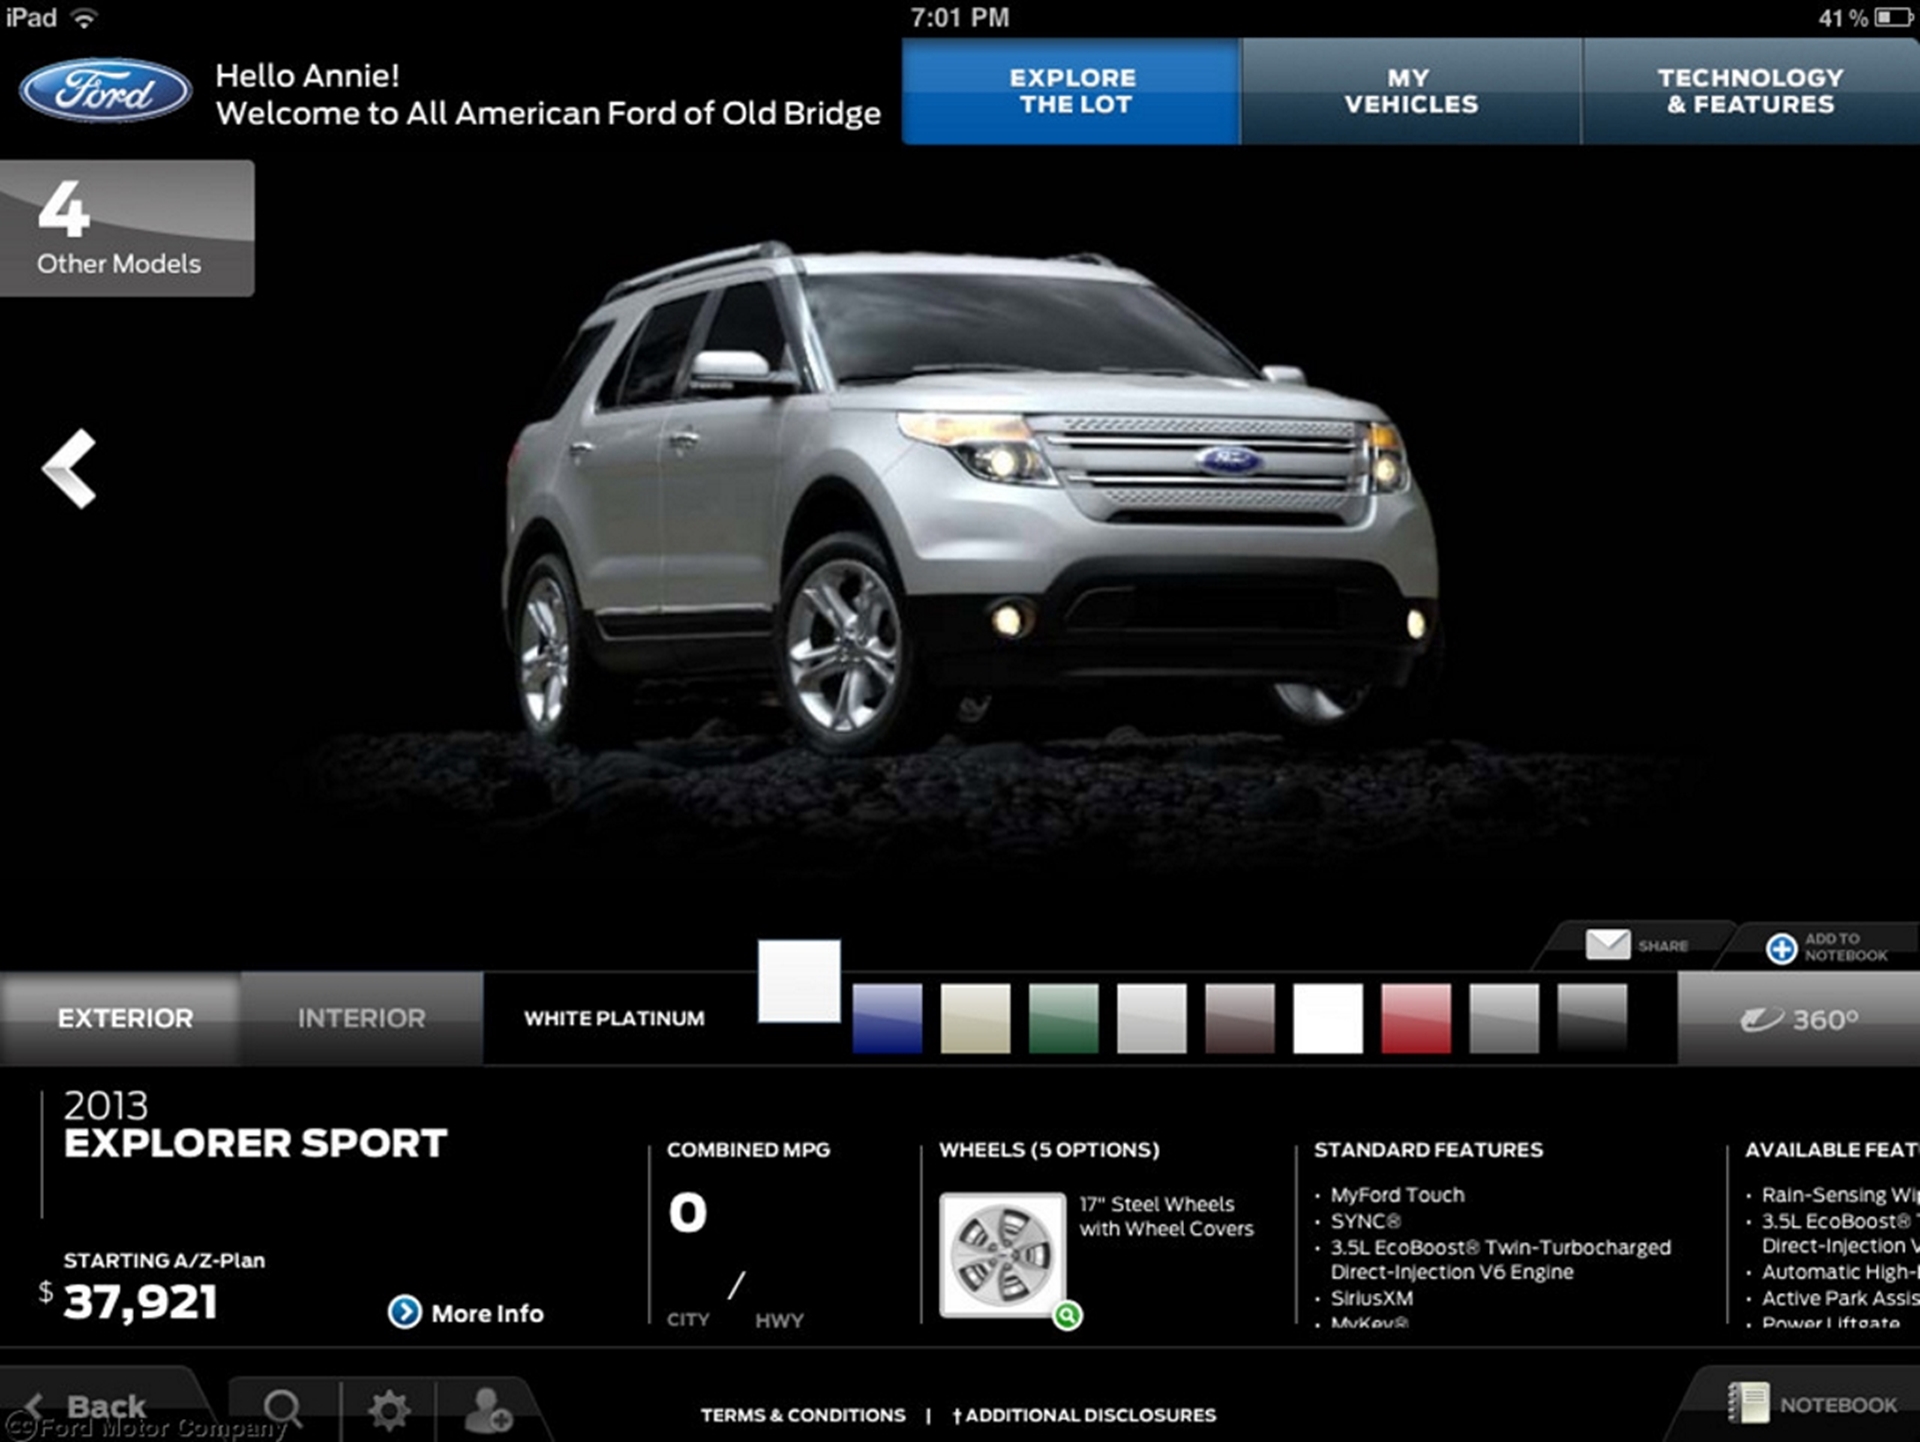 Ford Dealers Now Using SHOWCASE App and Apple iPad to Improve Customer Purchase Experience